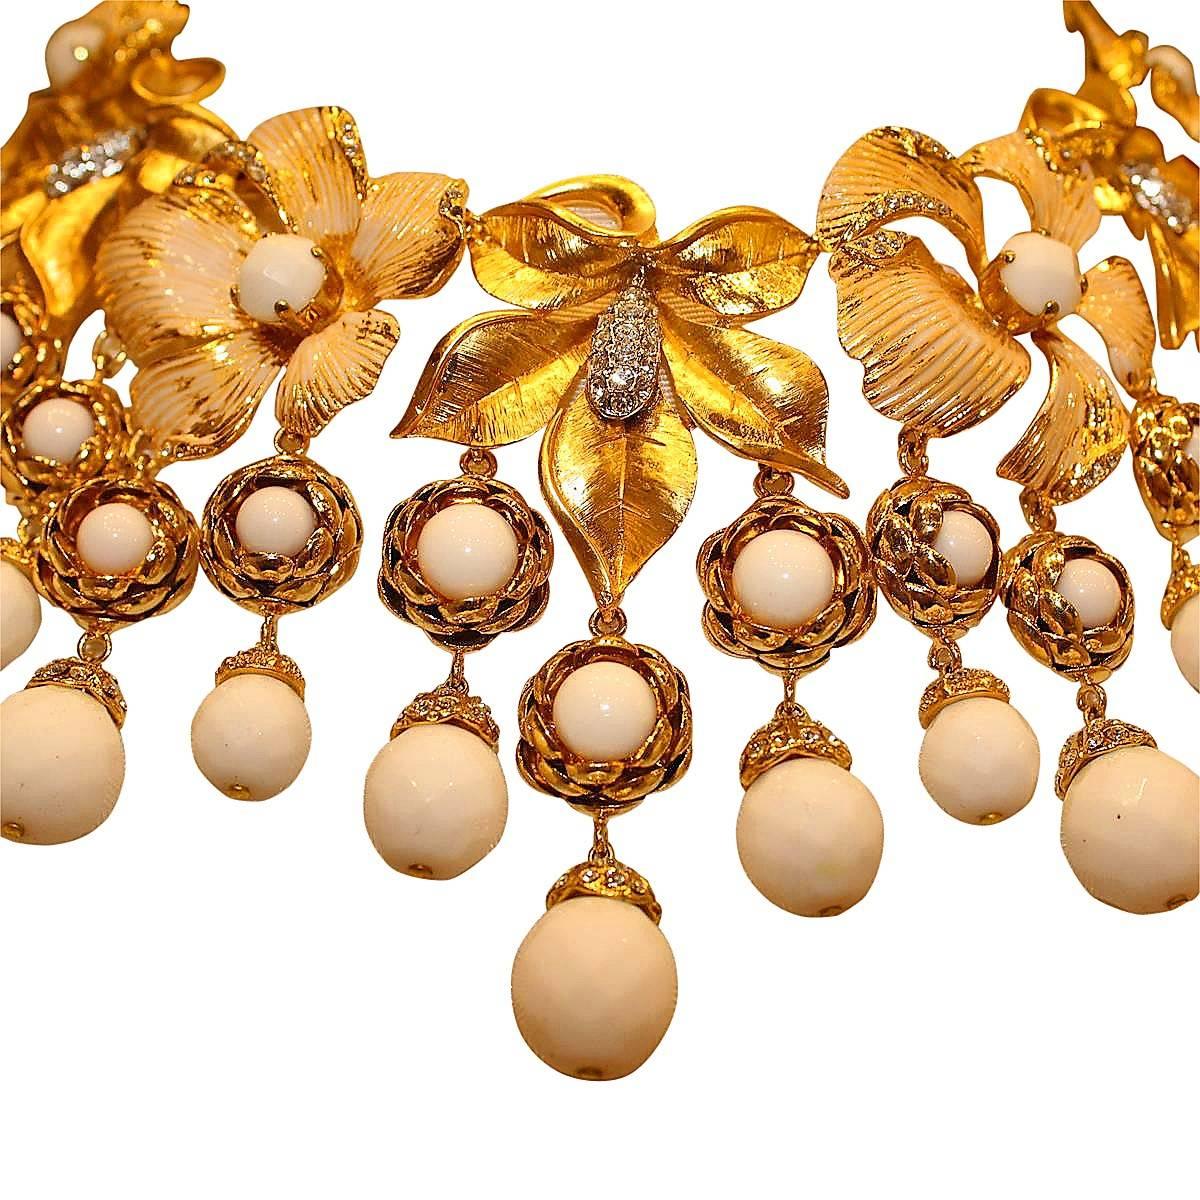 Masterpiece by Carlo Zini
One of the world's best bijoux designers
Non allergenic rhodium
Gold dipped3
Amazing creation of rhinestones and faux pearls
100% Artisanal work
Unique piece !
Condition: New from showroom
Made in Italy 
Worldwide express